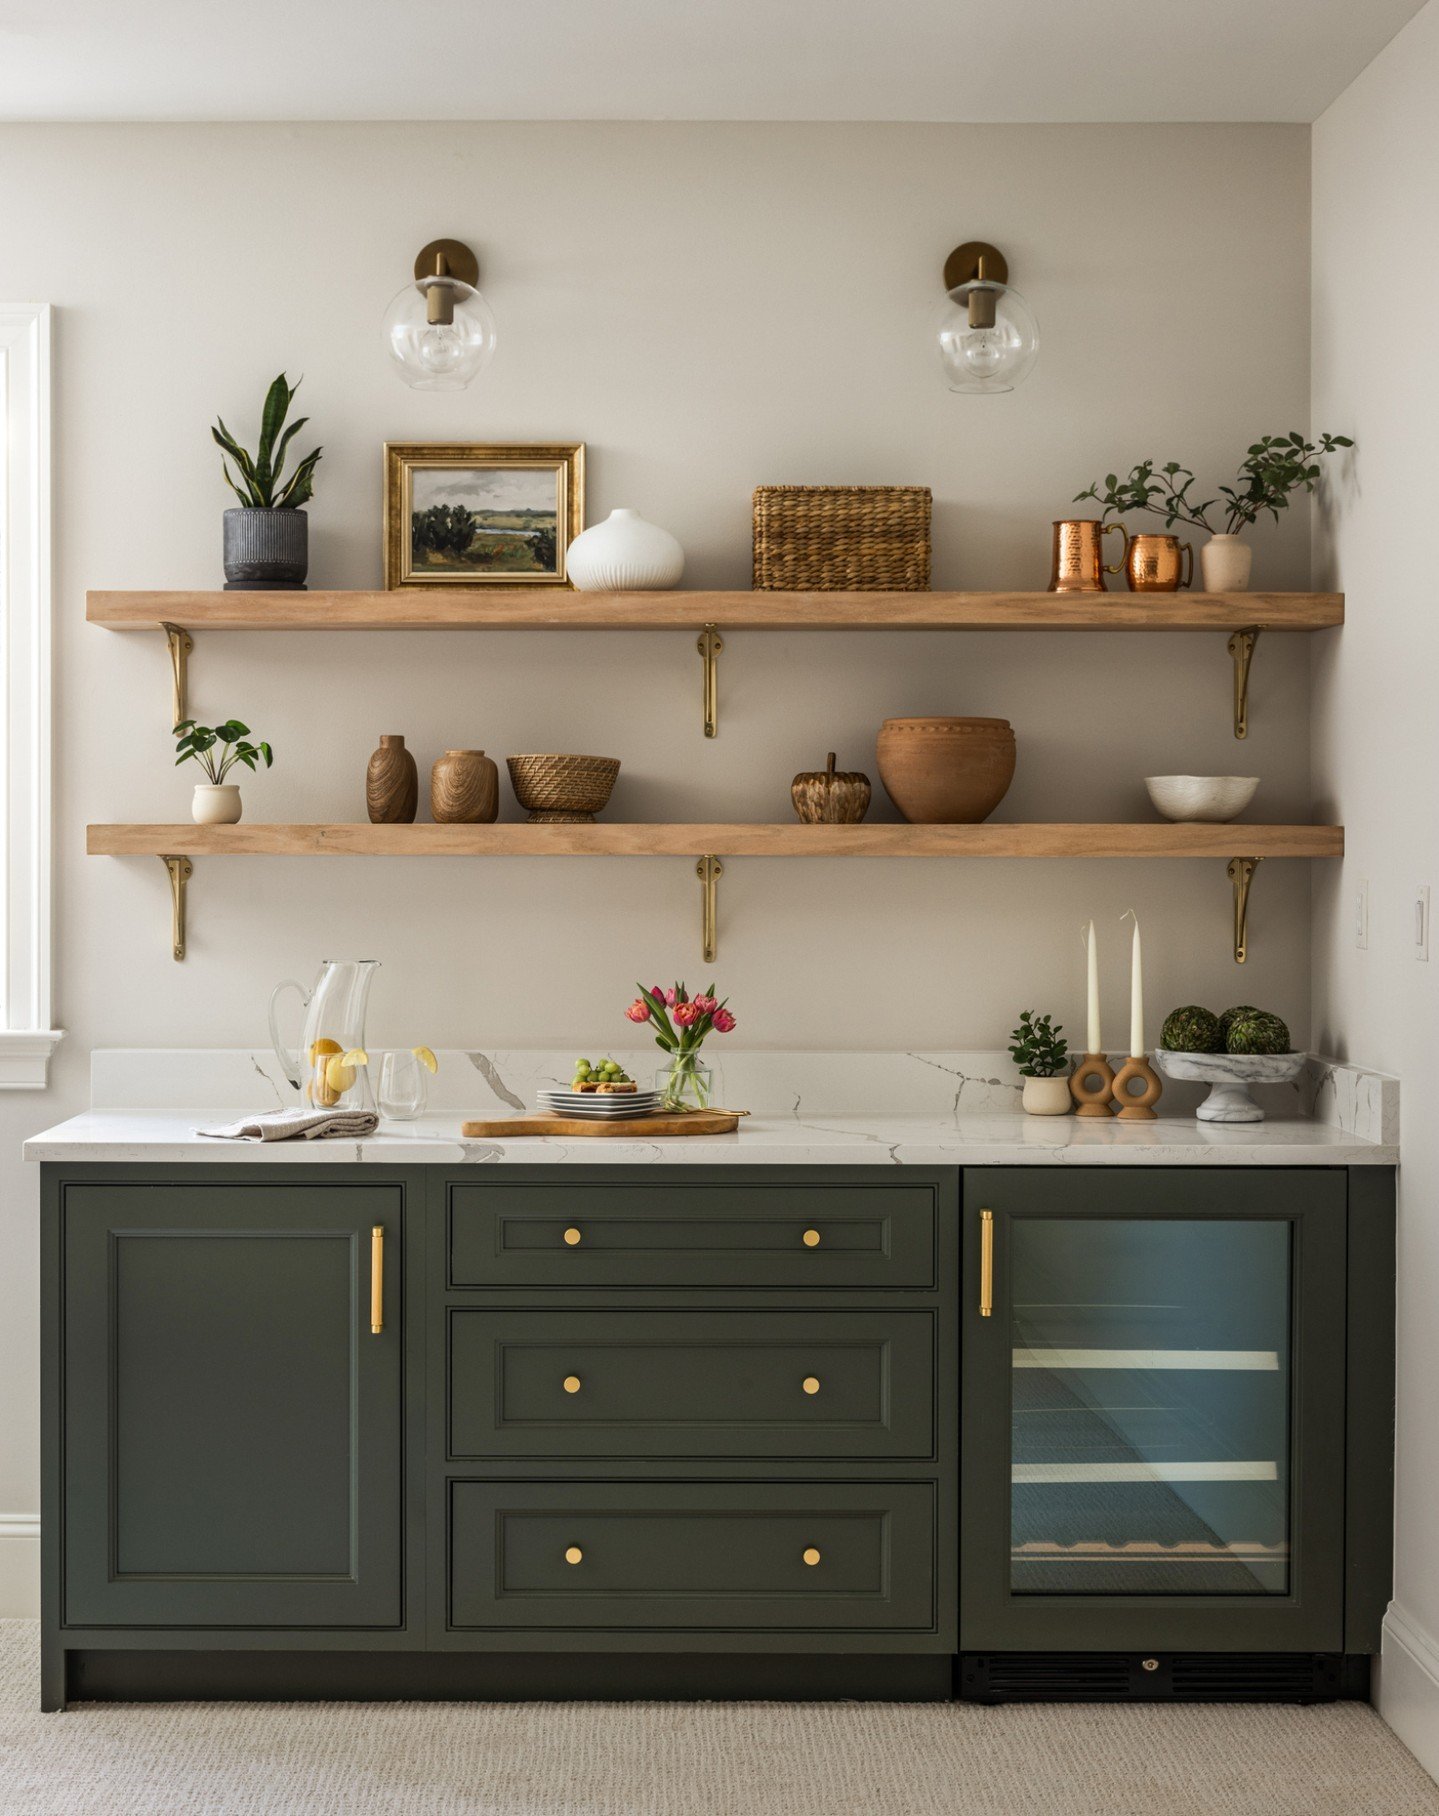 Want to make your butler's pantry or basement bar both functional and beautiful? Here are some tips from our design team! 🍸

1. Think about how you'll actually use the space most often and make that the focal point.  Maybe its best used as a daily c